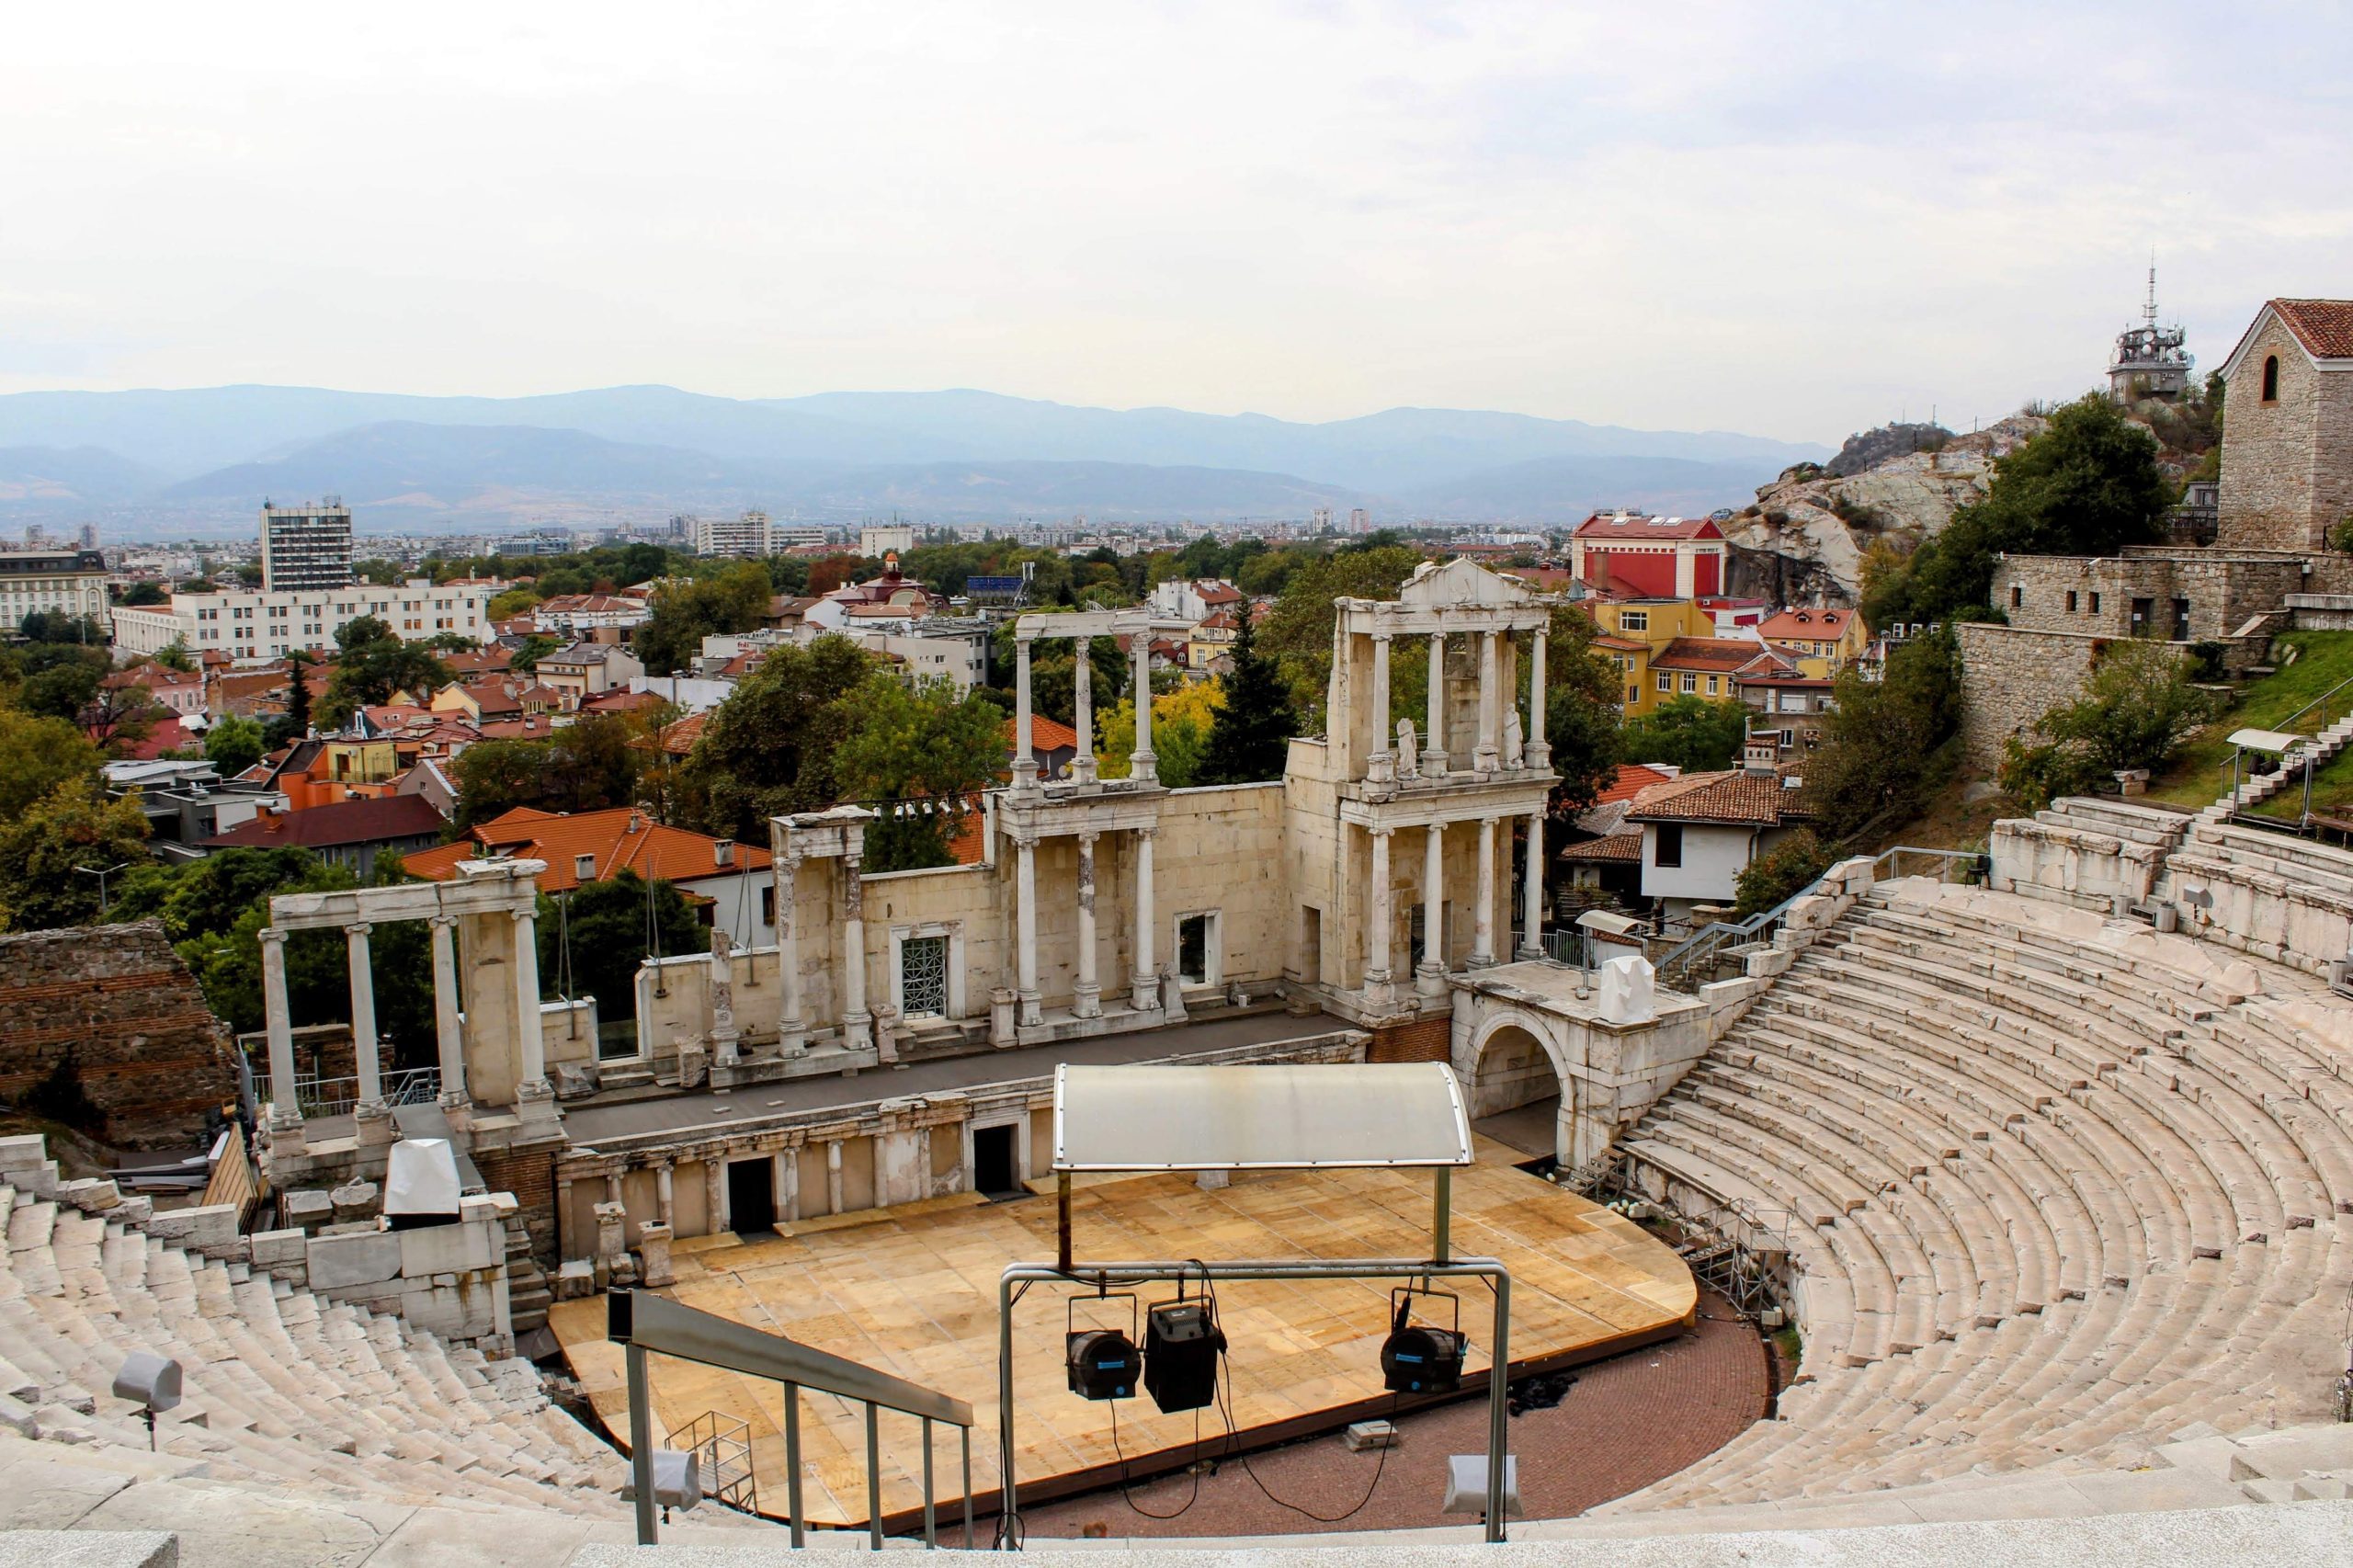 Photo of the ancient theatre in Plovdiv